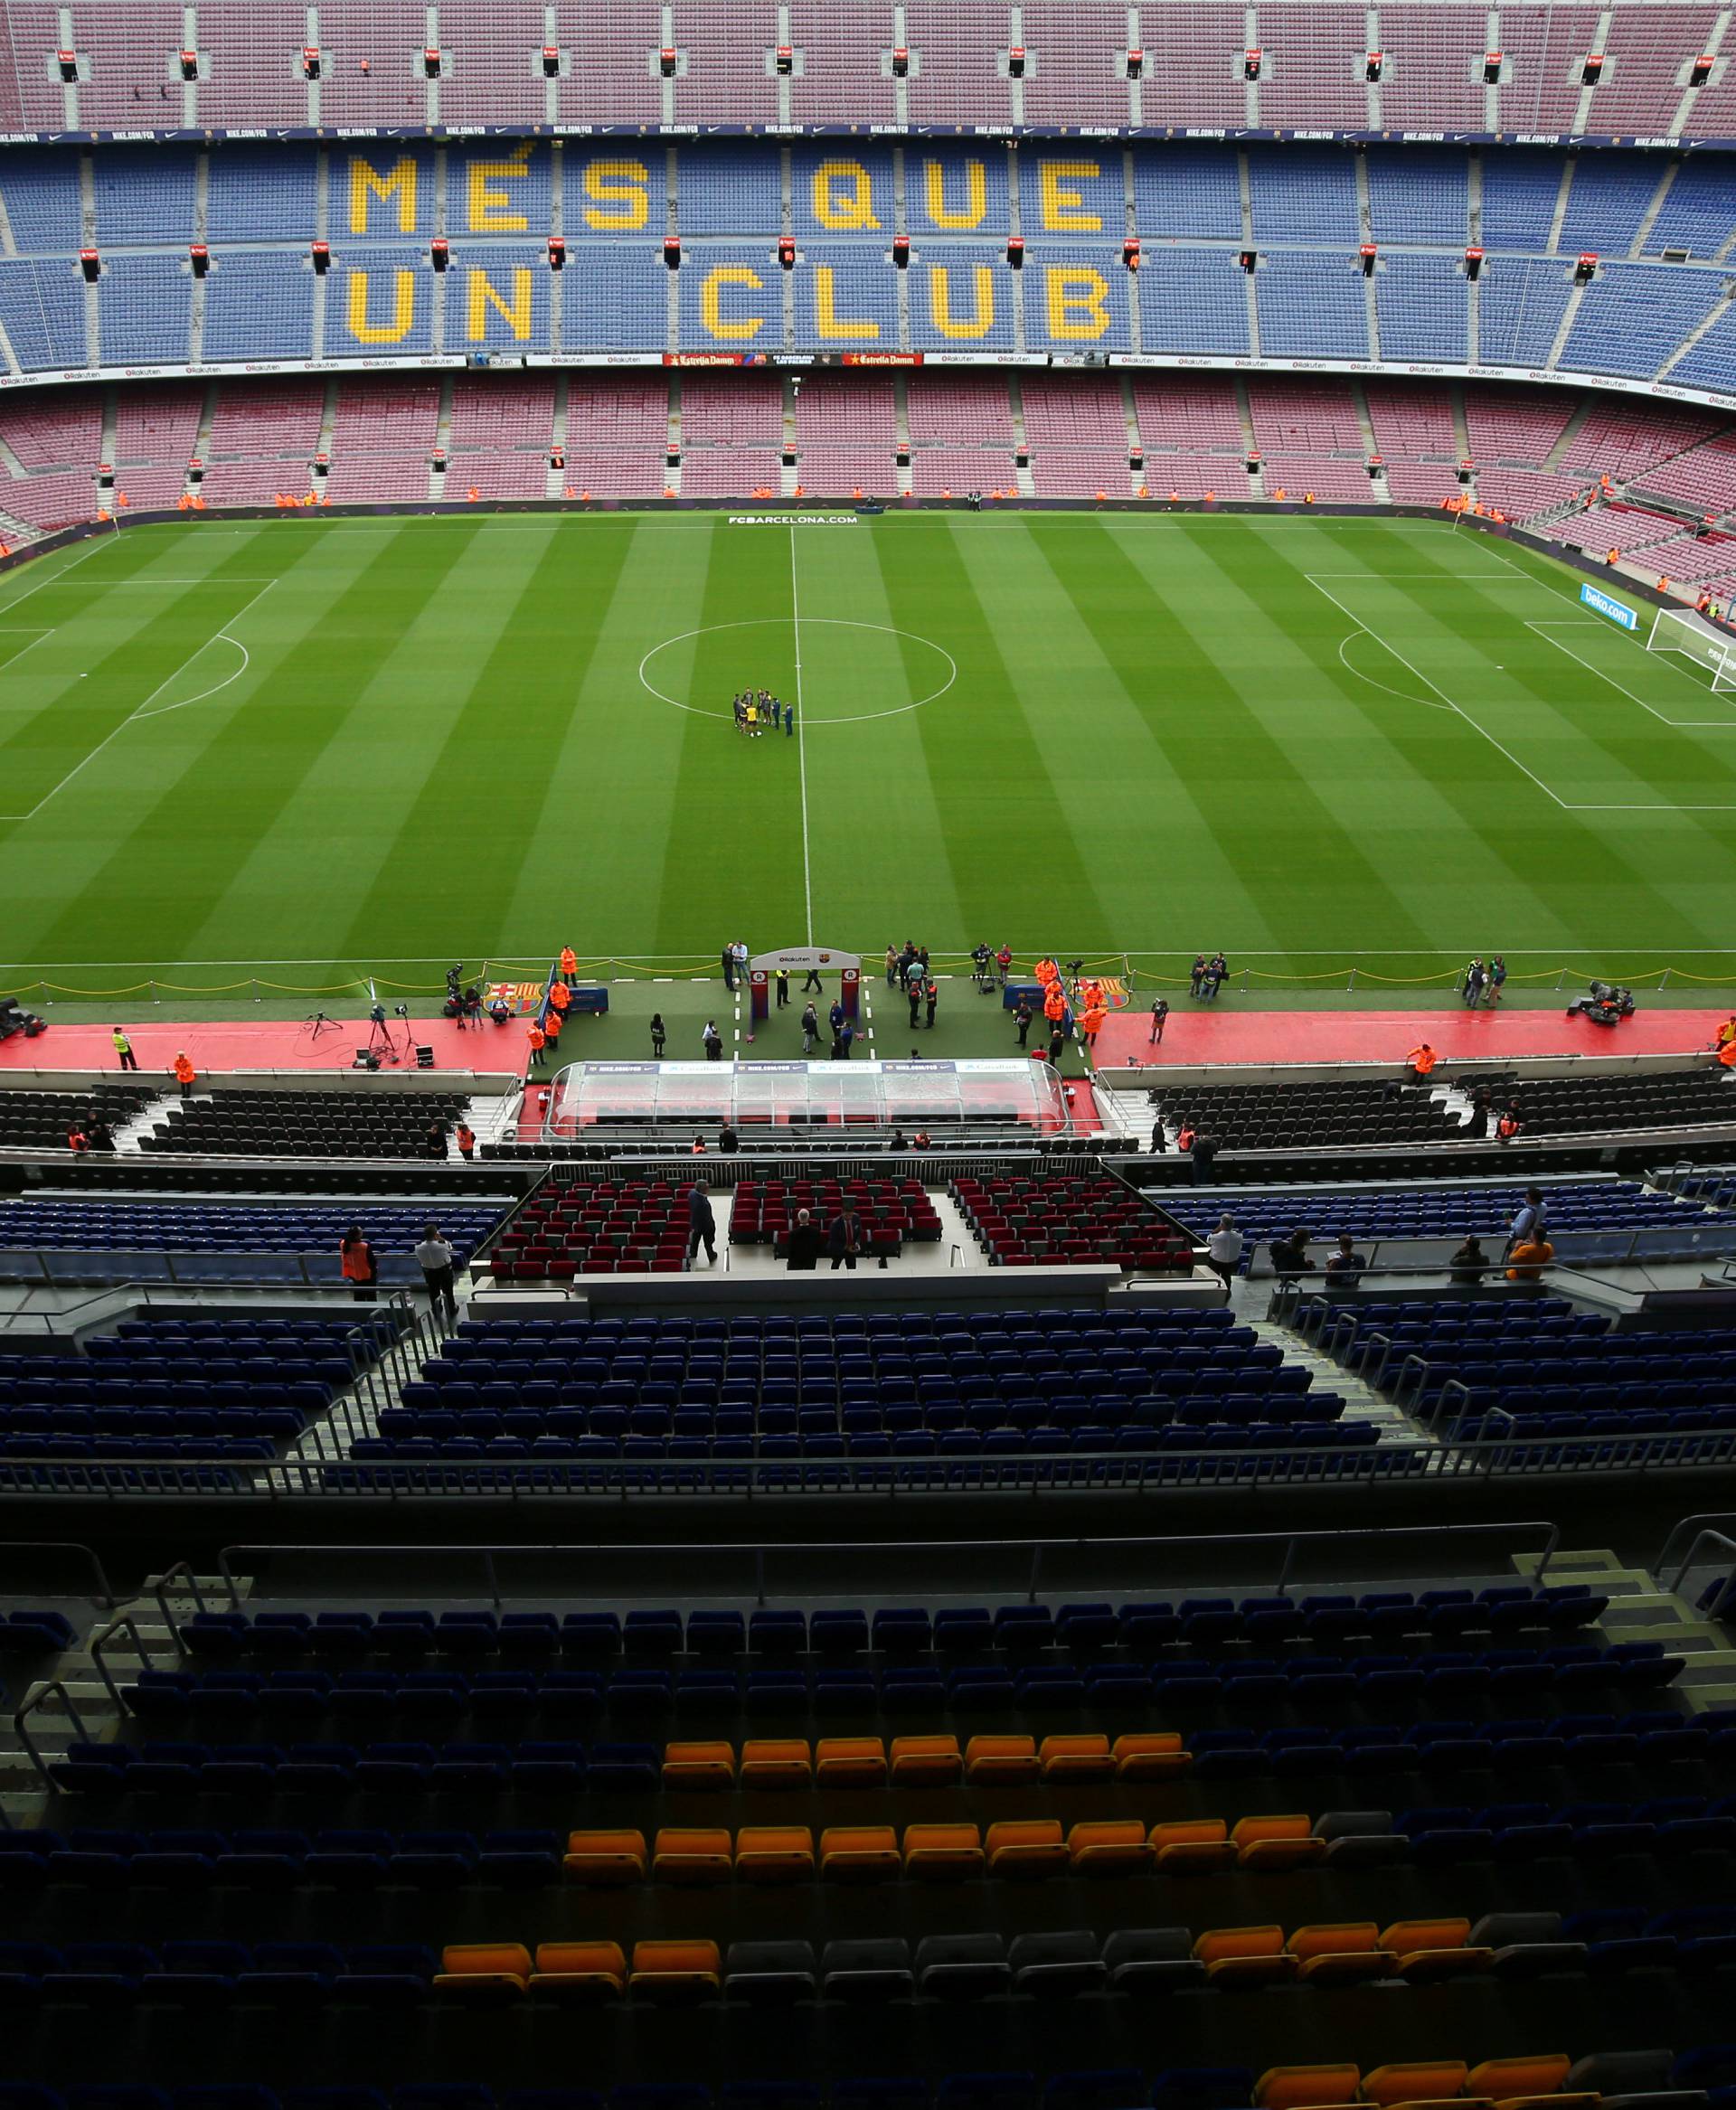 General view of Camp Nou stadium before the start of Spanish La Liga soccer match between Barcelona and Las Palmas in Barcelona